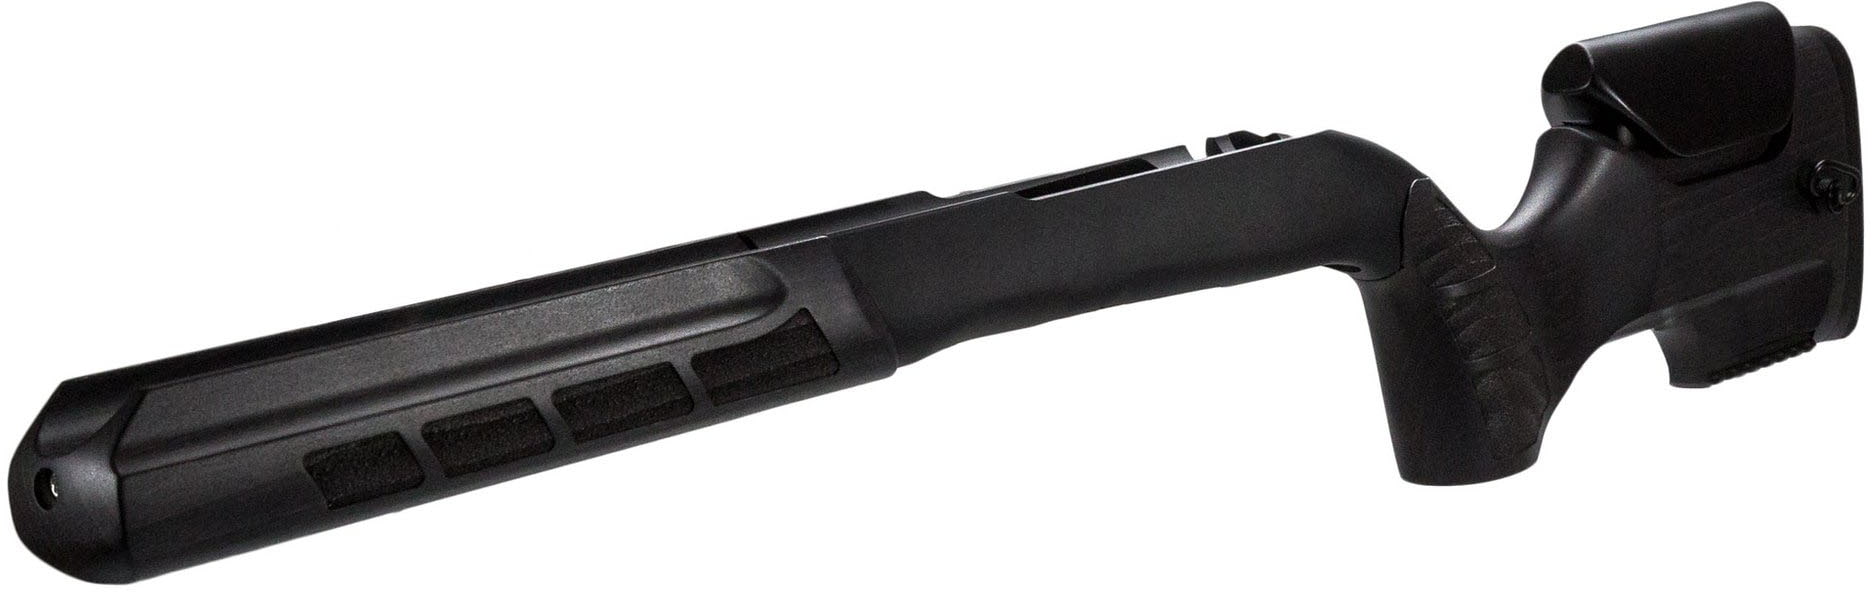 Woox Exactus Stock Savage 110 Chassis Up To 10 Off W Free Shipping